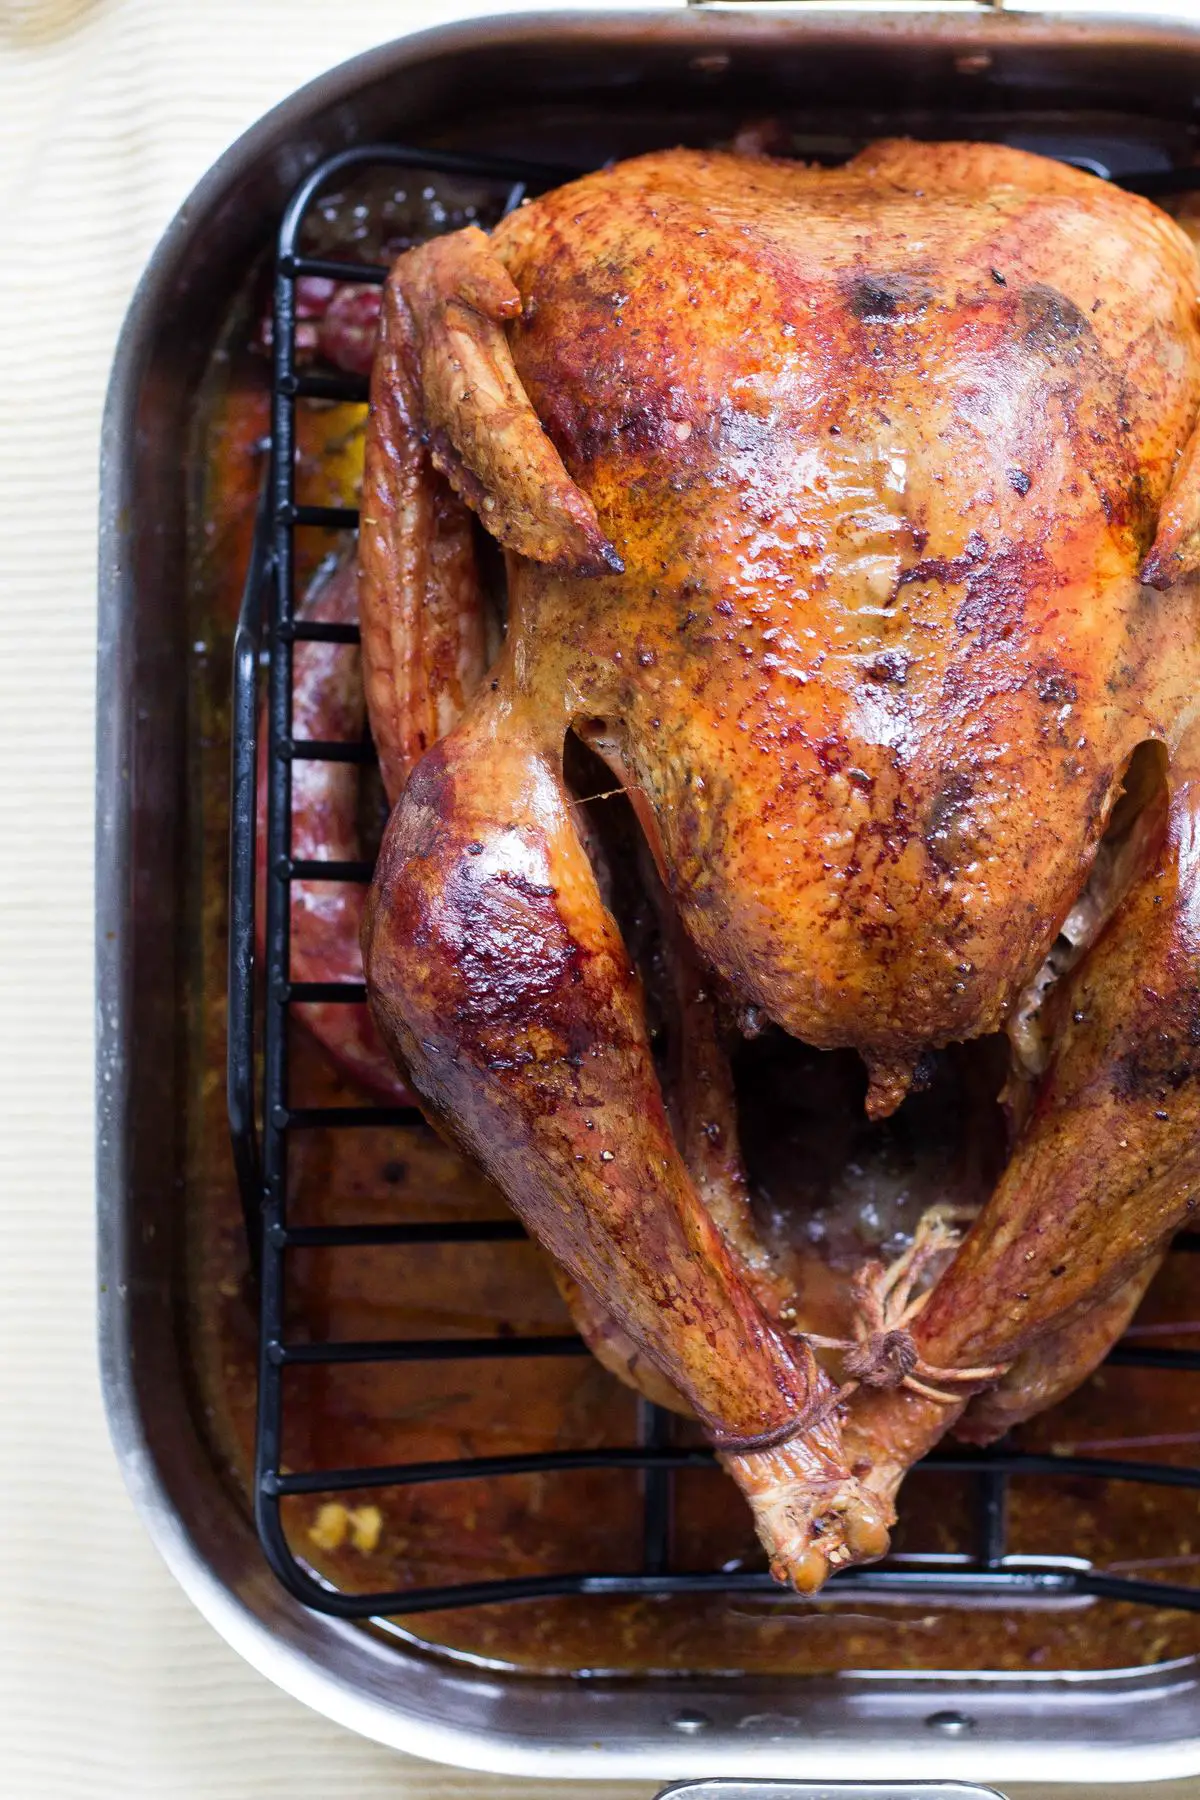 A deliciously seasoned rotisserie chicken displayed with golden brown skin.